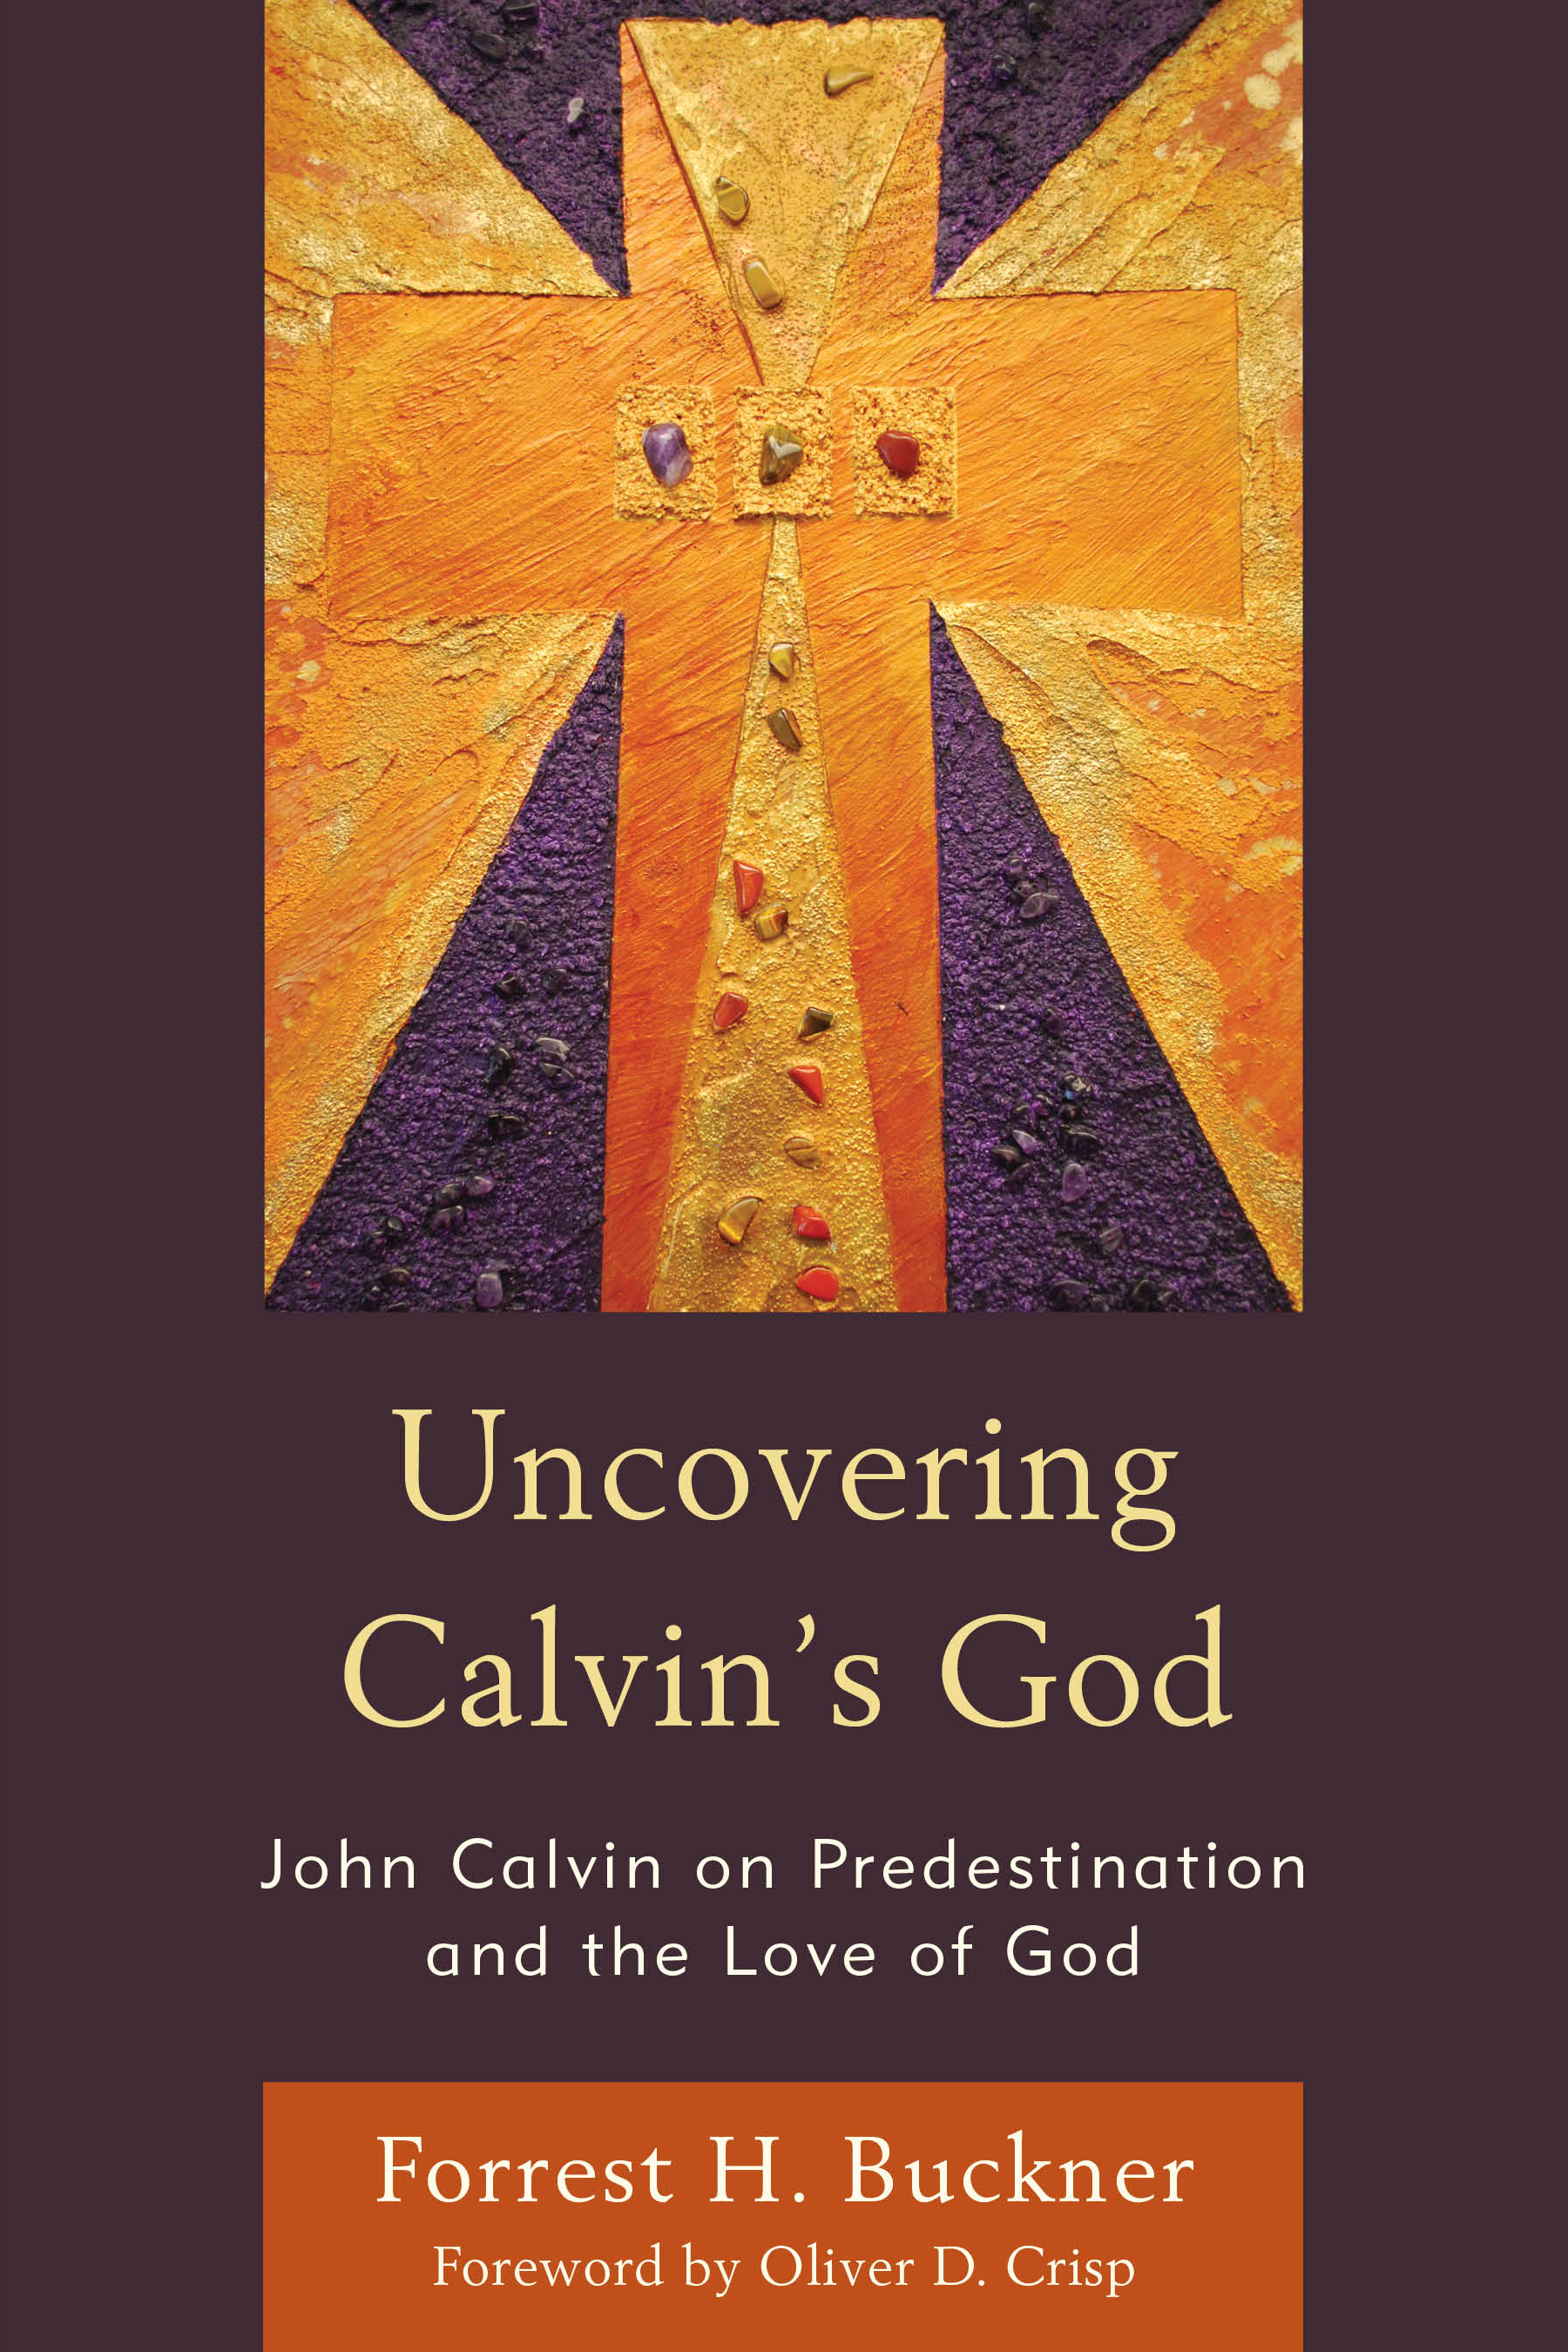 Uncovering Calvin’s God: John Calvin on Predestination and the Love of God